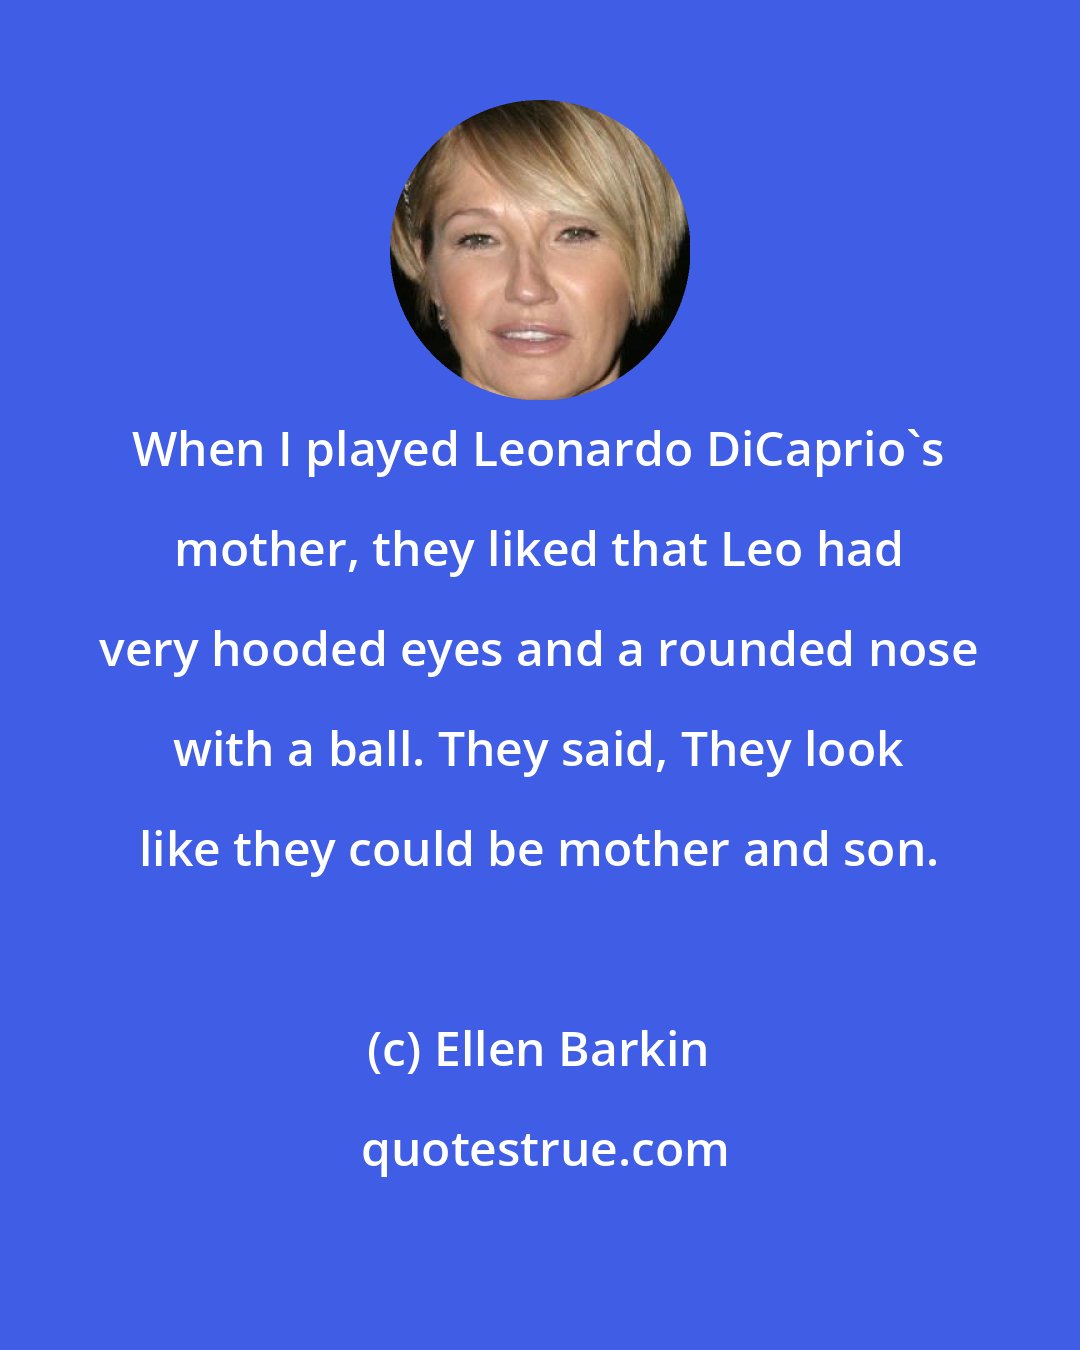 Ellen Barkin: When I played Leonardo DiCaprio's mother, they liked that Leo had very hooded eyes and a rounded nose with a ball. They said, They look like they could be mother and son.